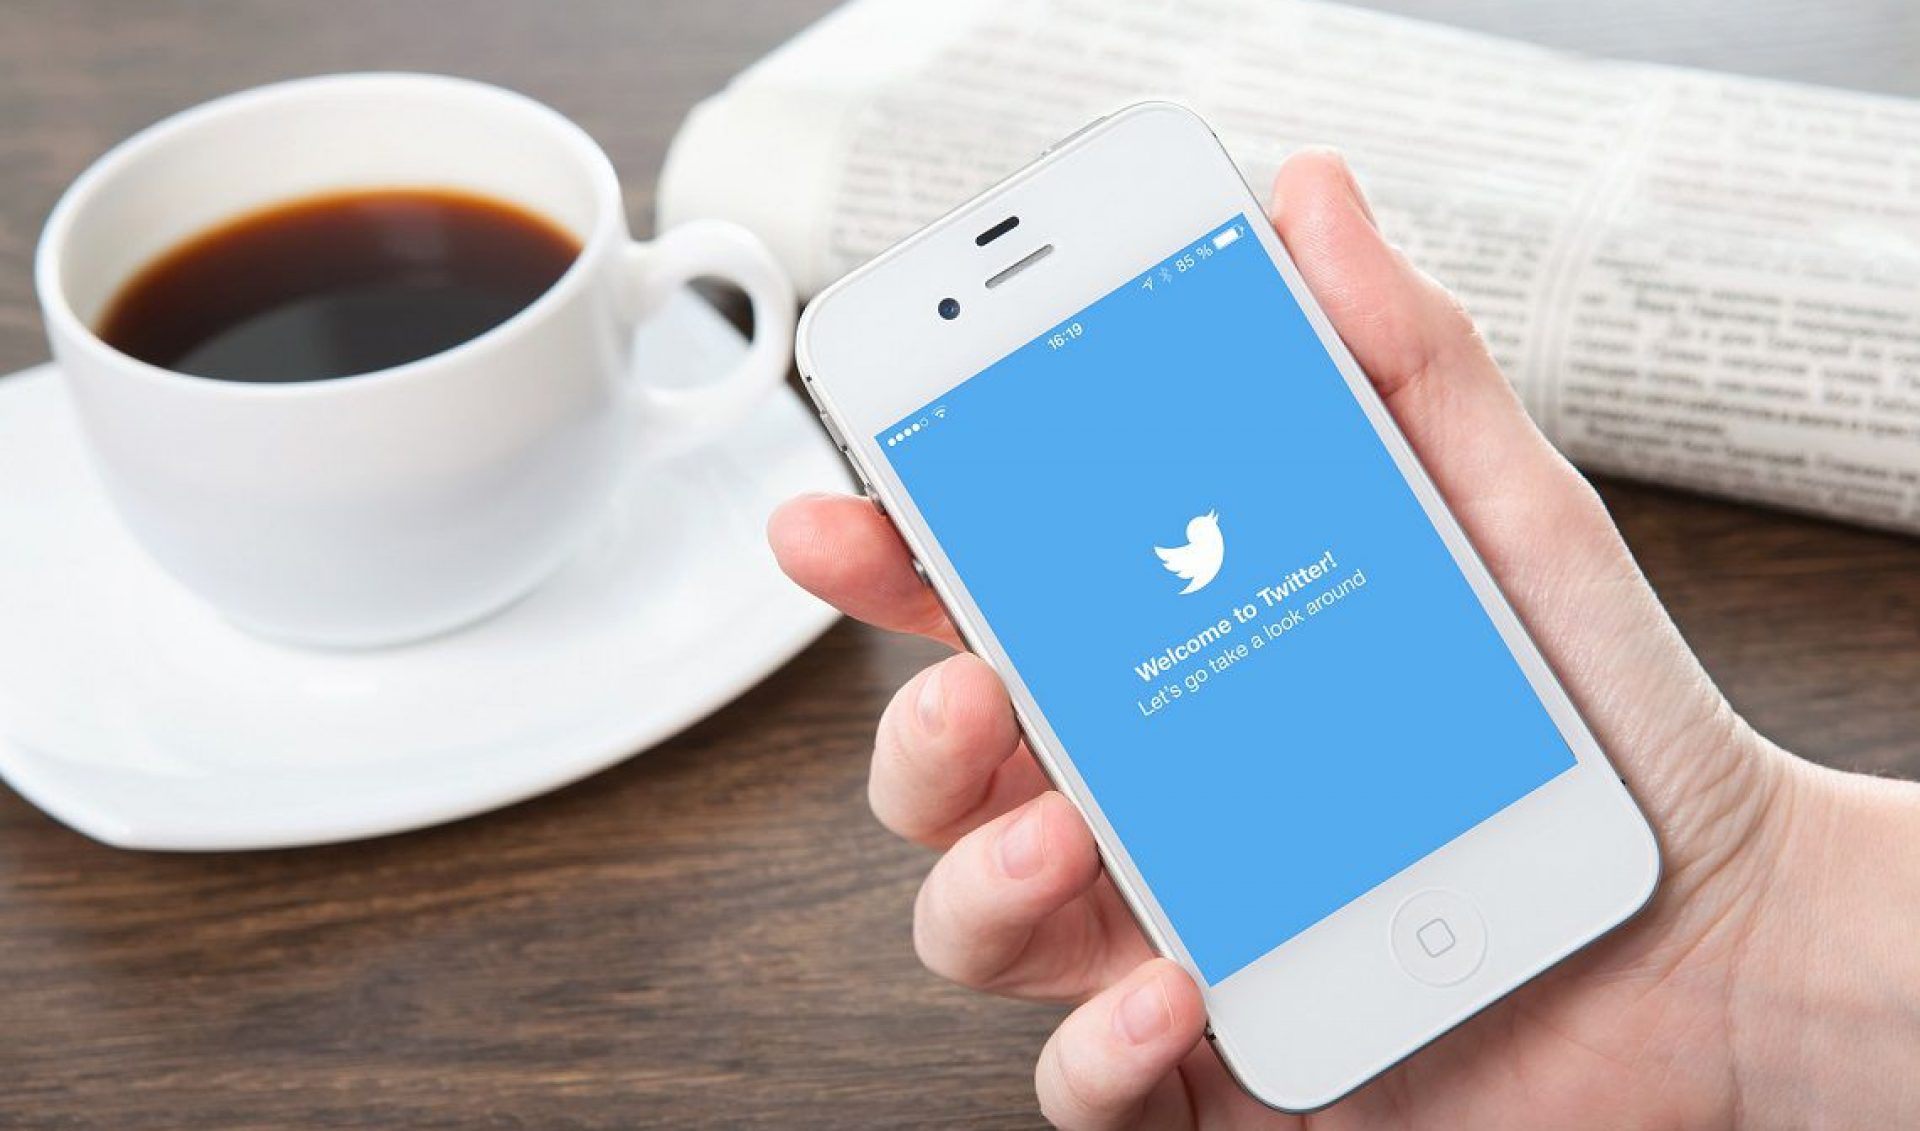 Twitter Now Lets Brands Purchase “App-Install” Video Ads